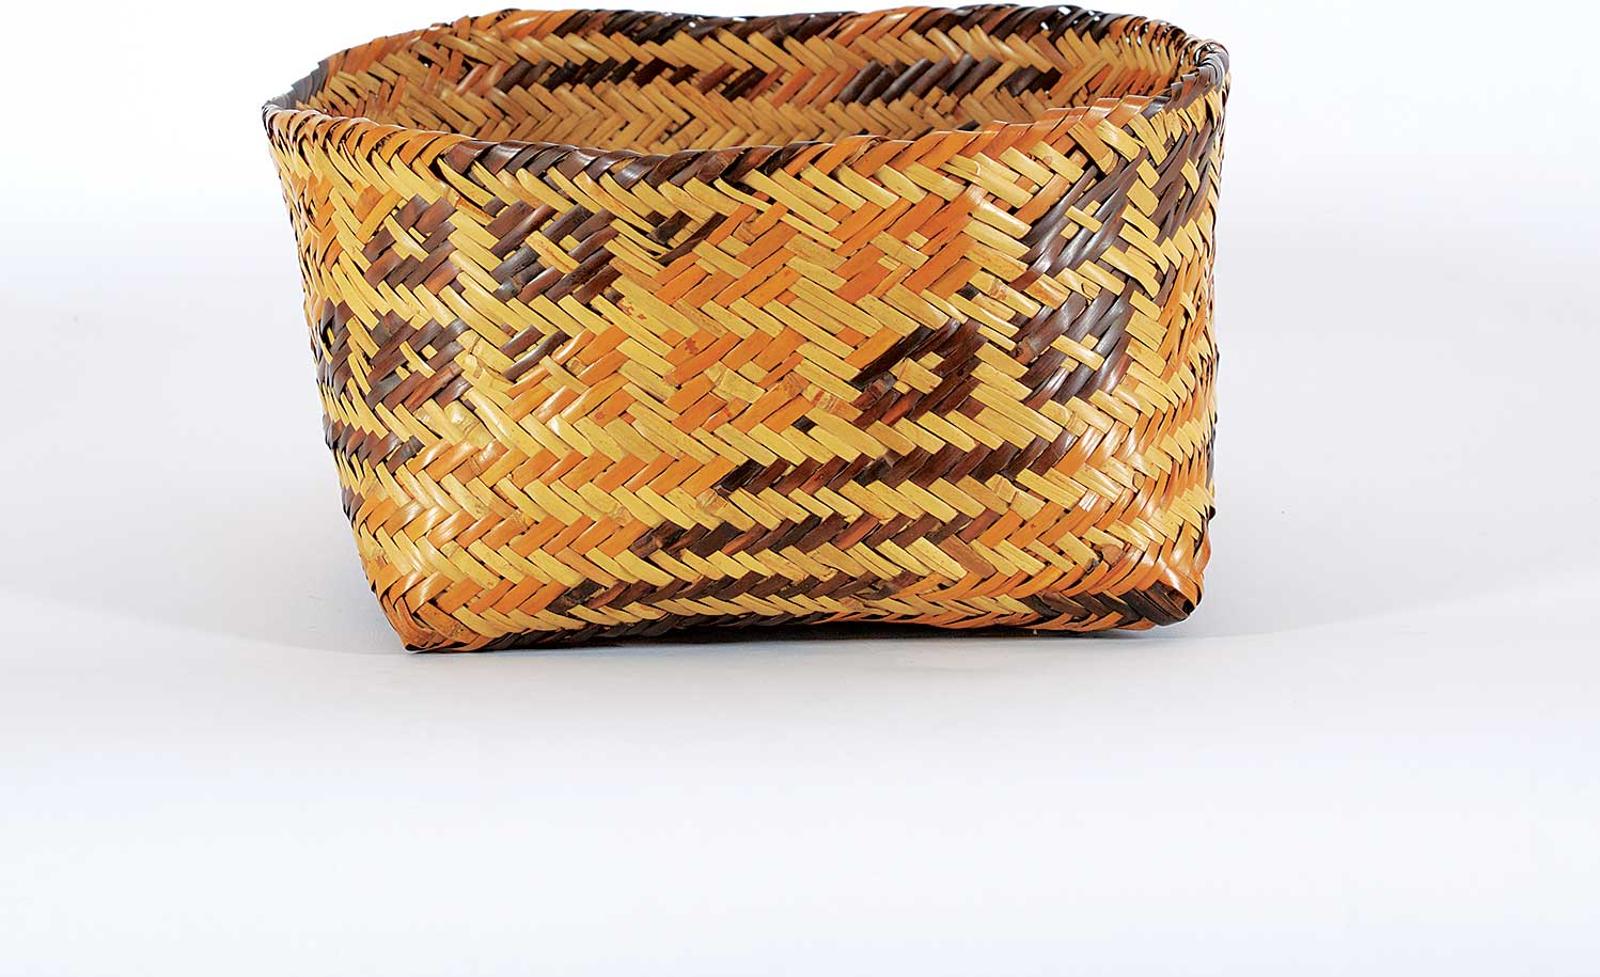 Northwest Coast First Nations School - Square Base Round Topped Basket